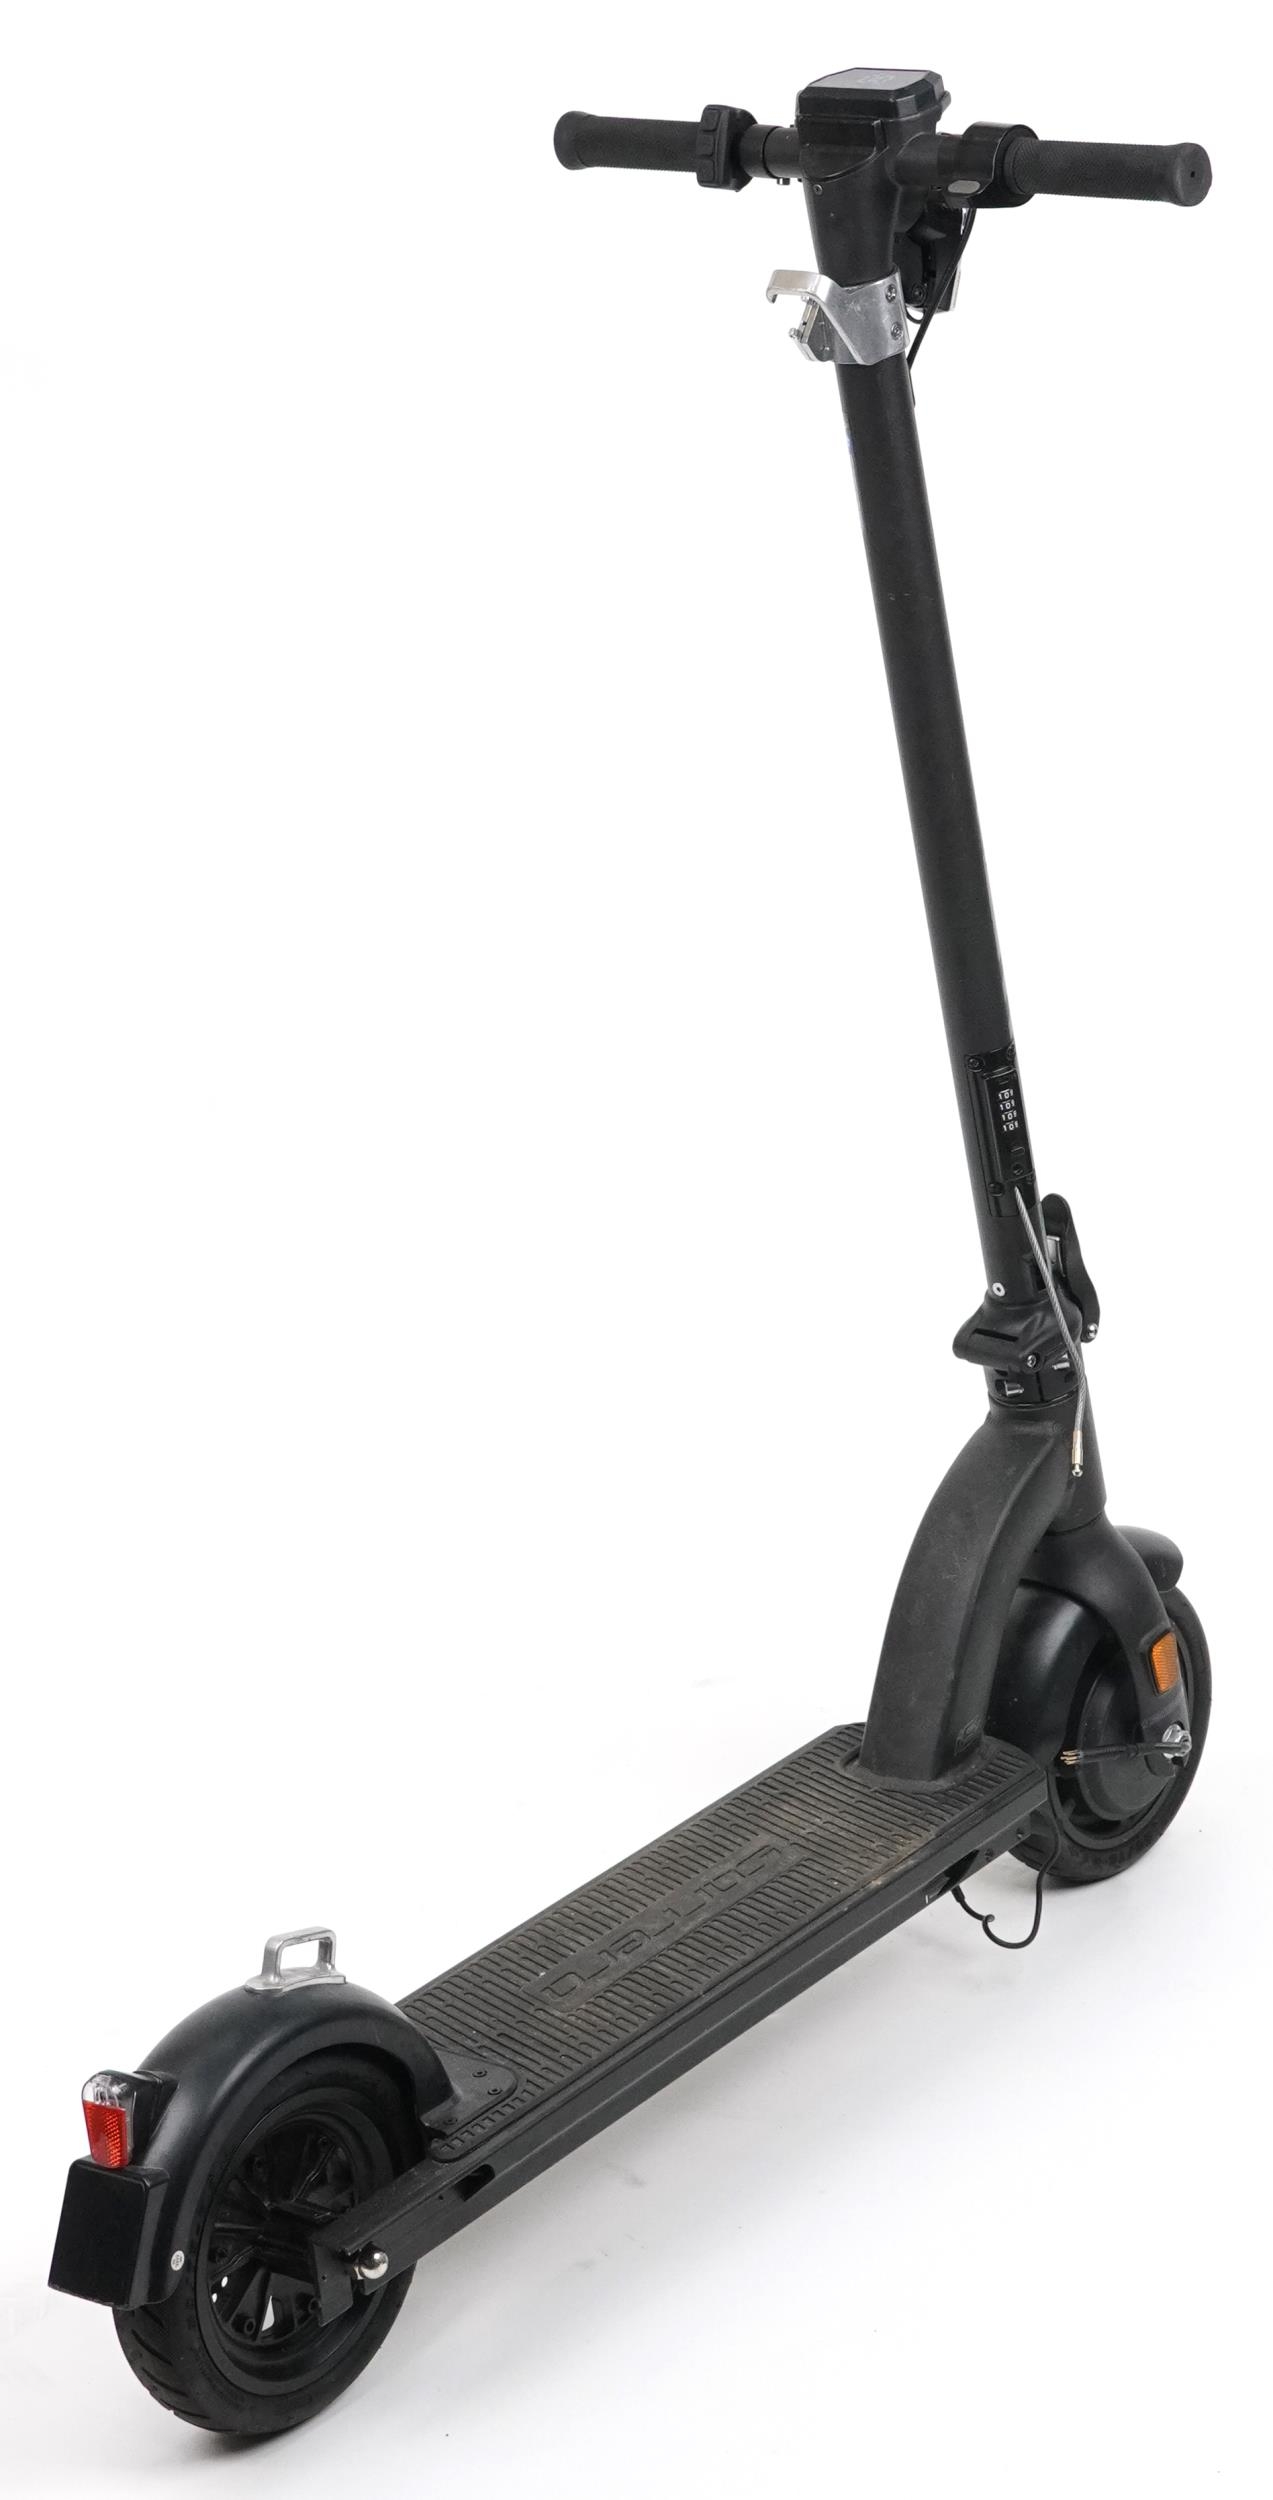 Correra Impel electric scooter - Image 2 of 2